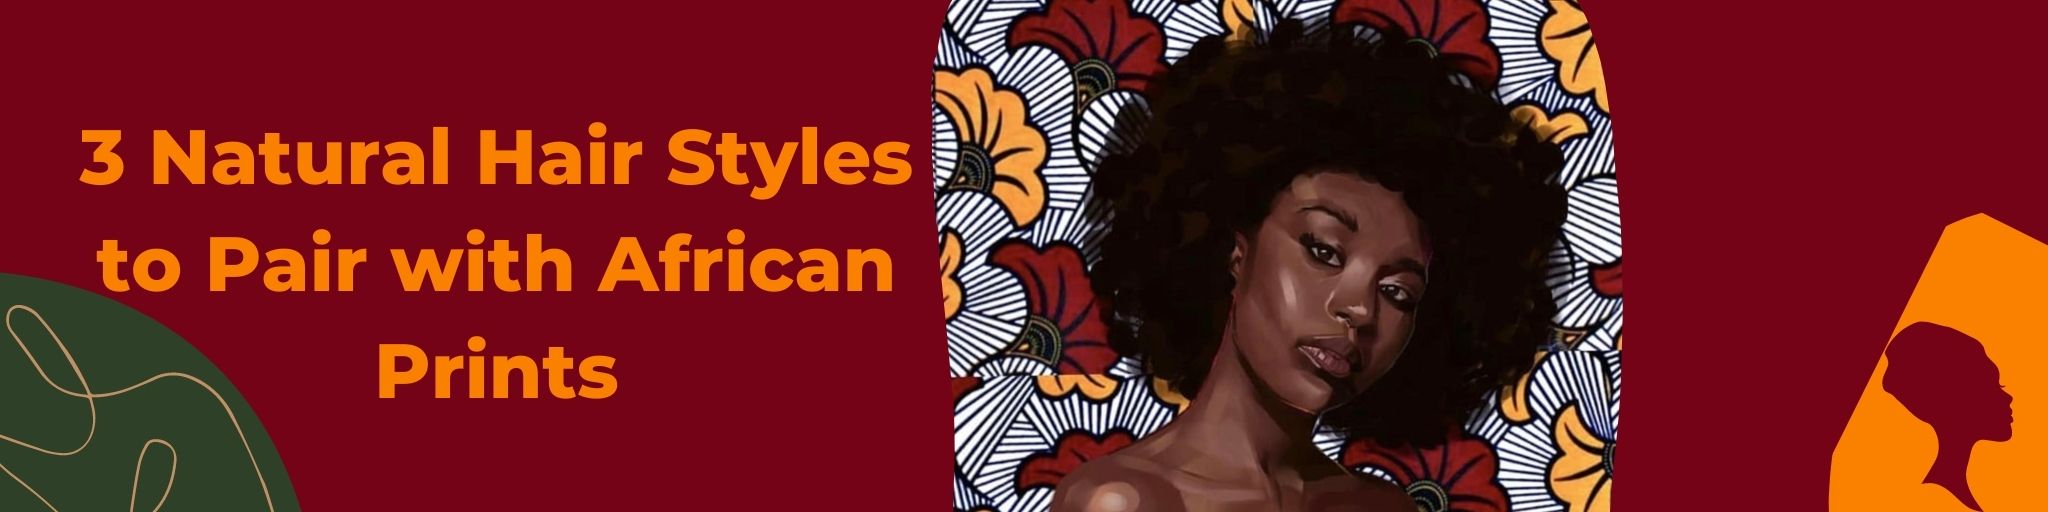 3 Natural Hair Styles to Pair with African Prints